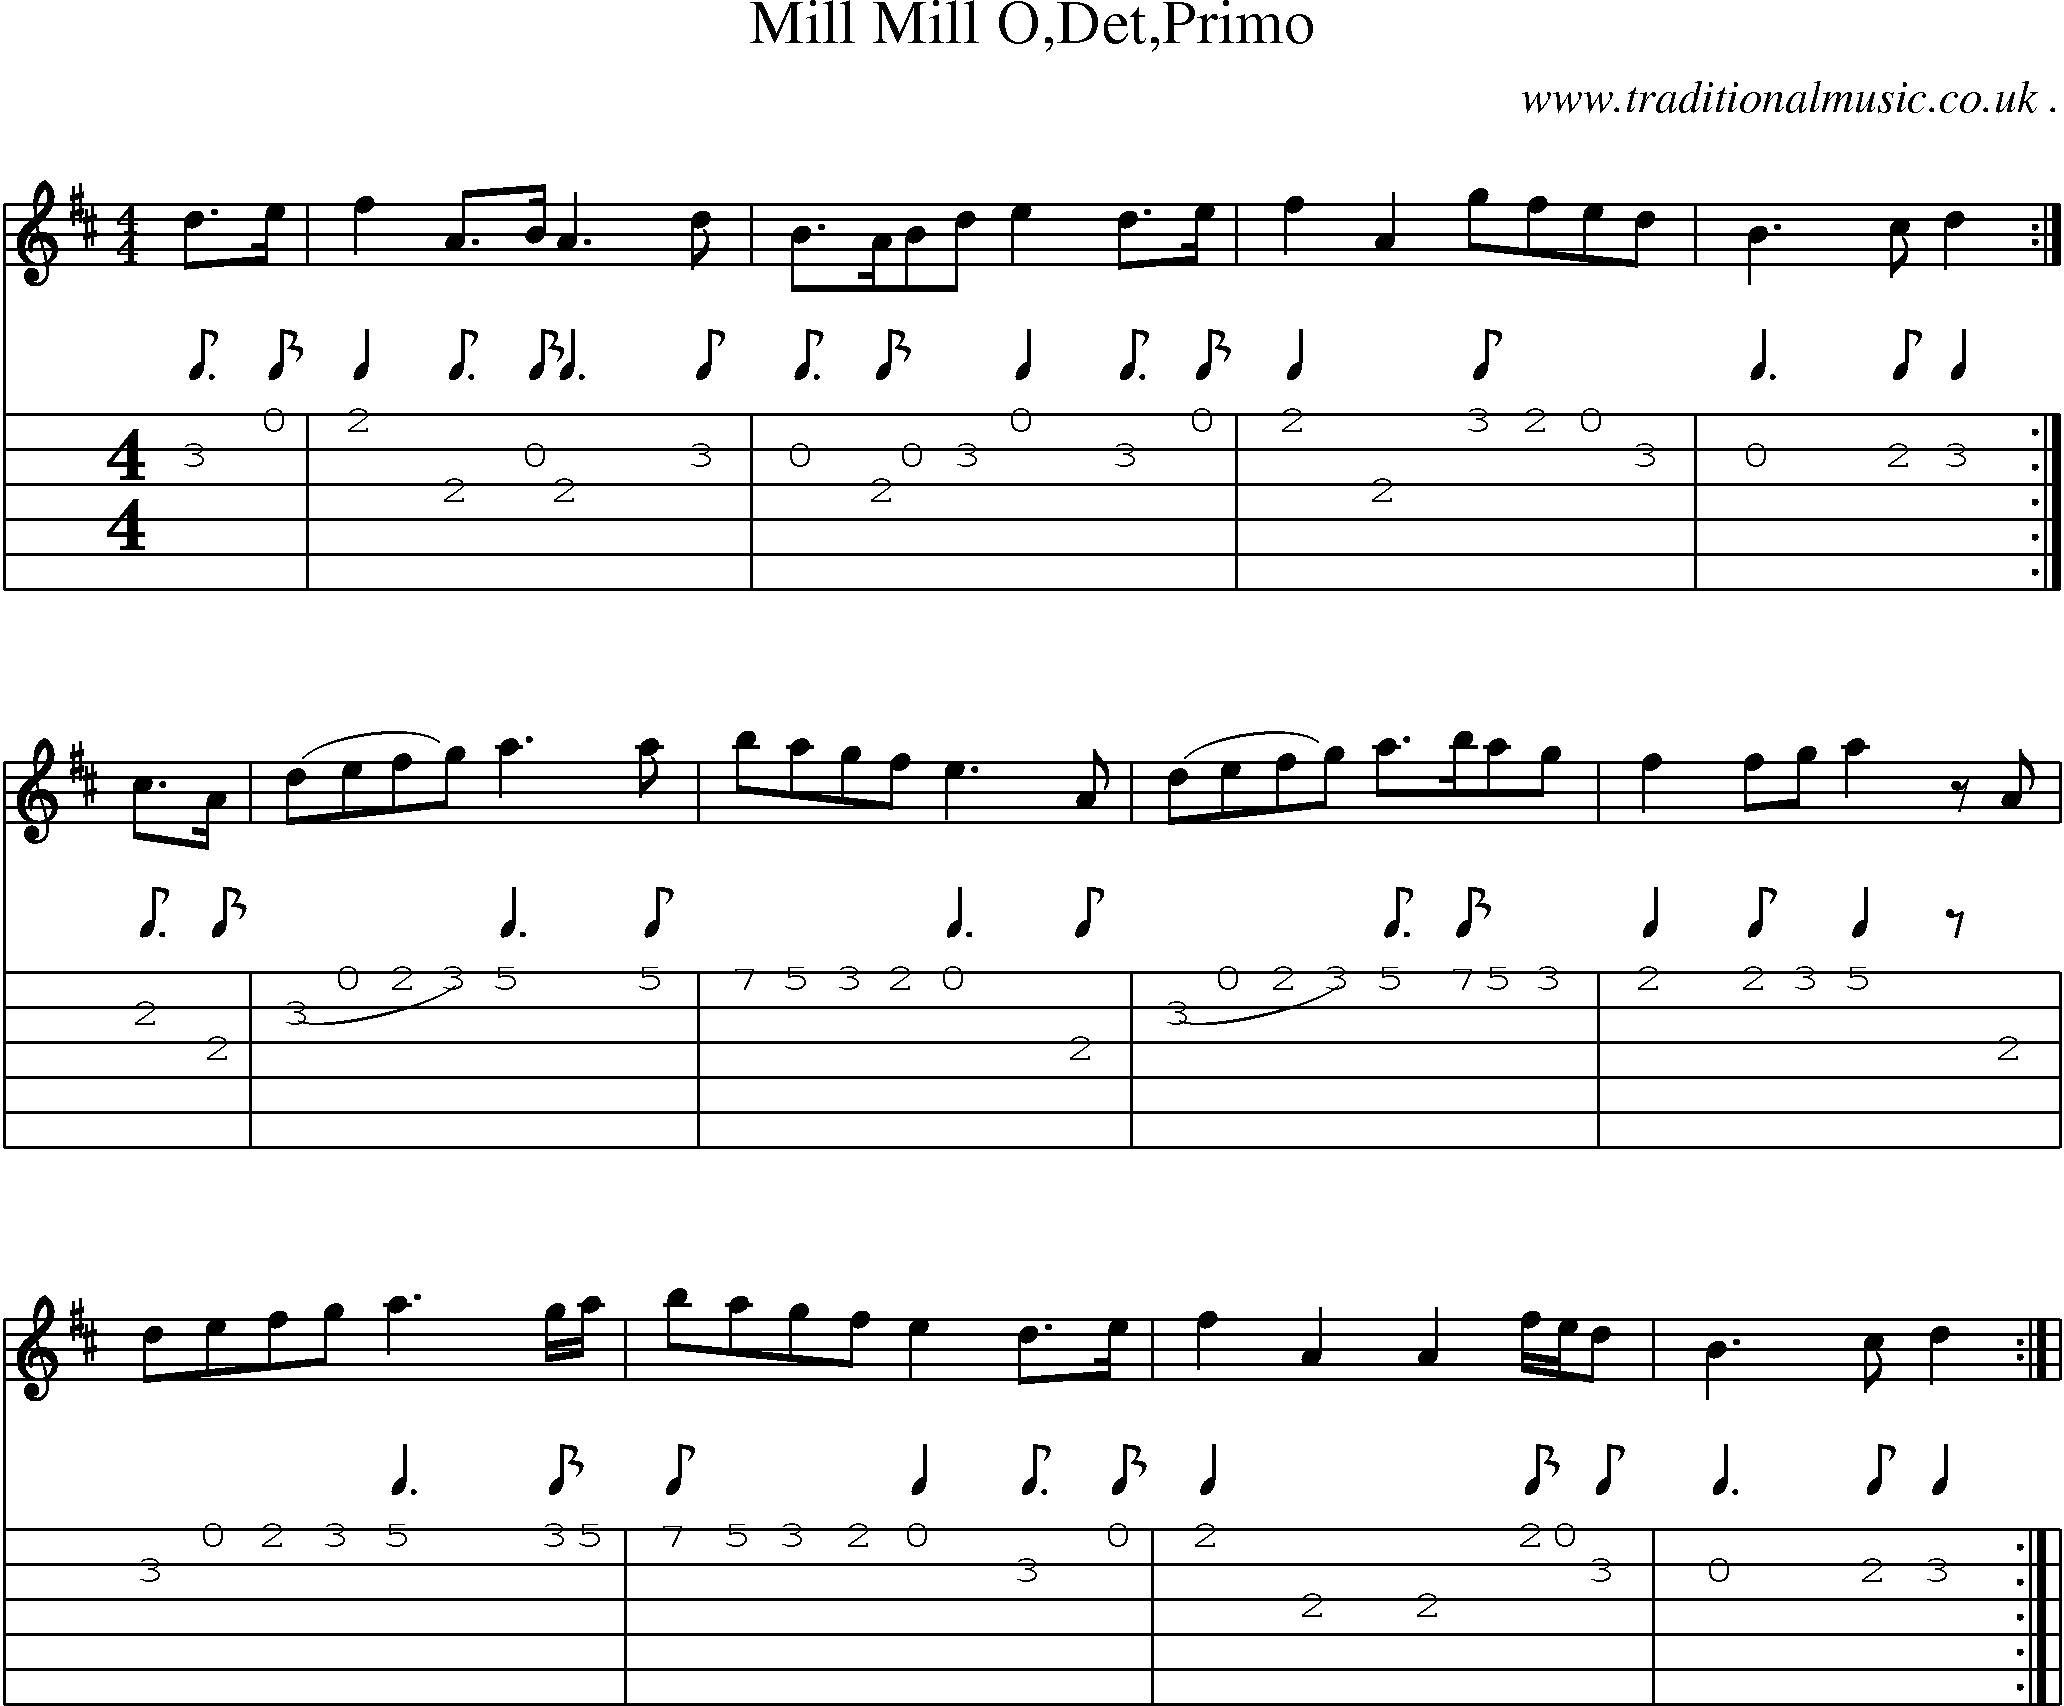 Sheet-Music and Guitar Tabs for Mill Mill Odetprimo